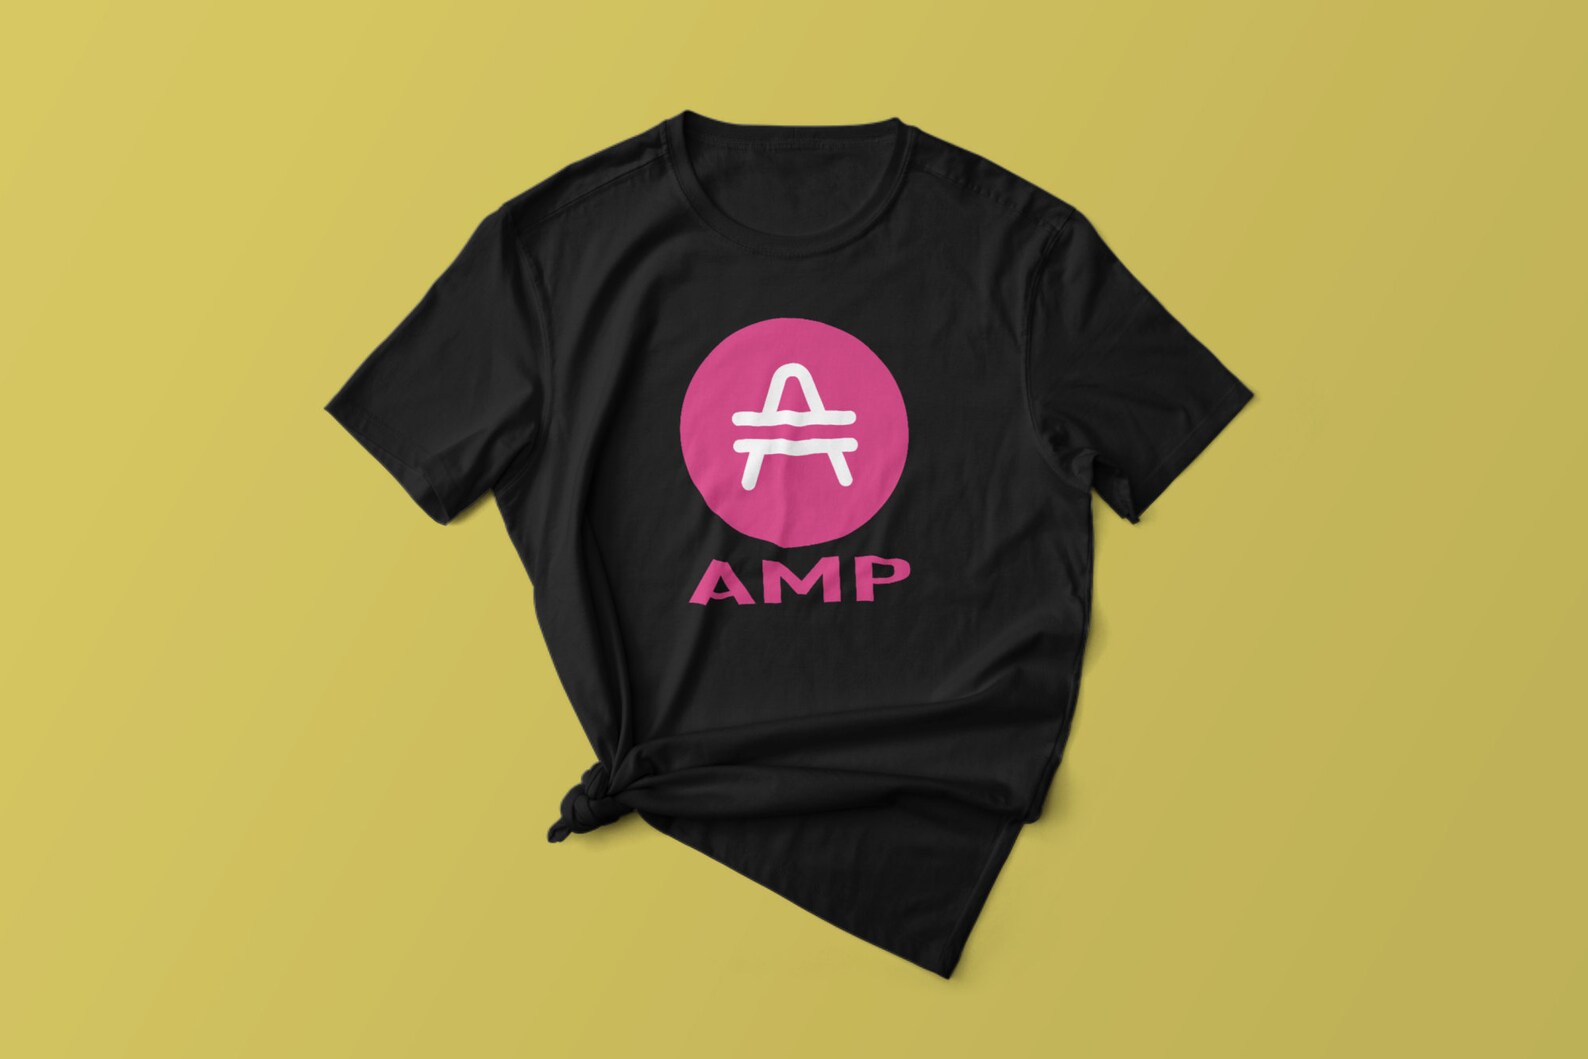 Amp Crypto Cryptocurrency Amp coin token Short-Sleeve ...